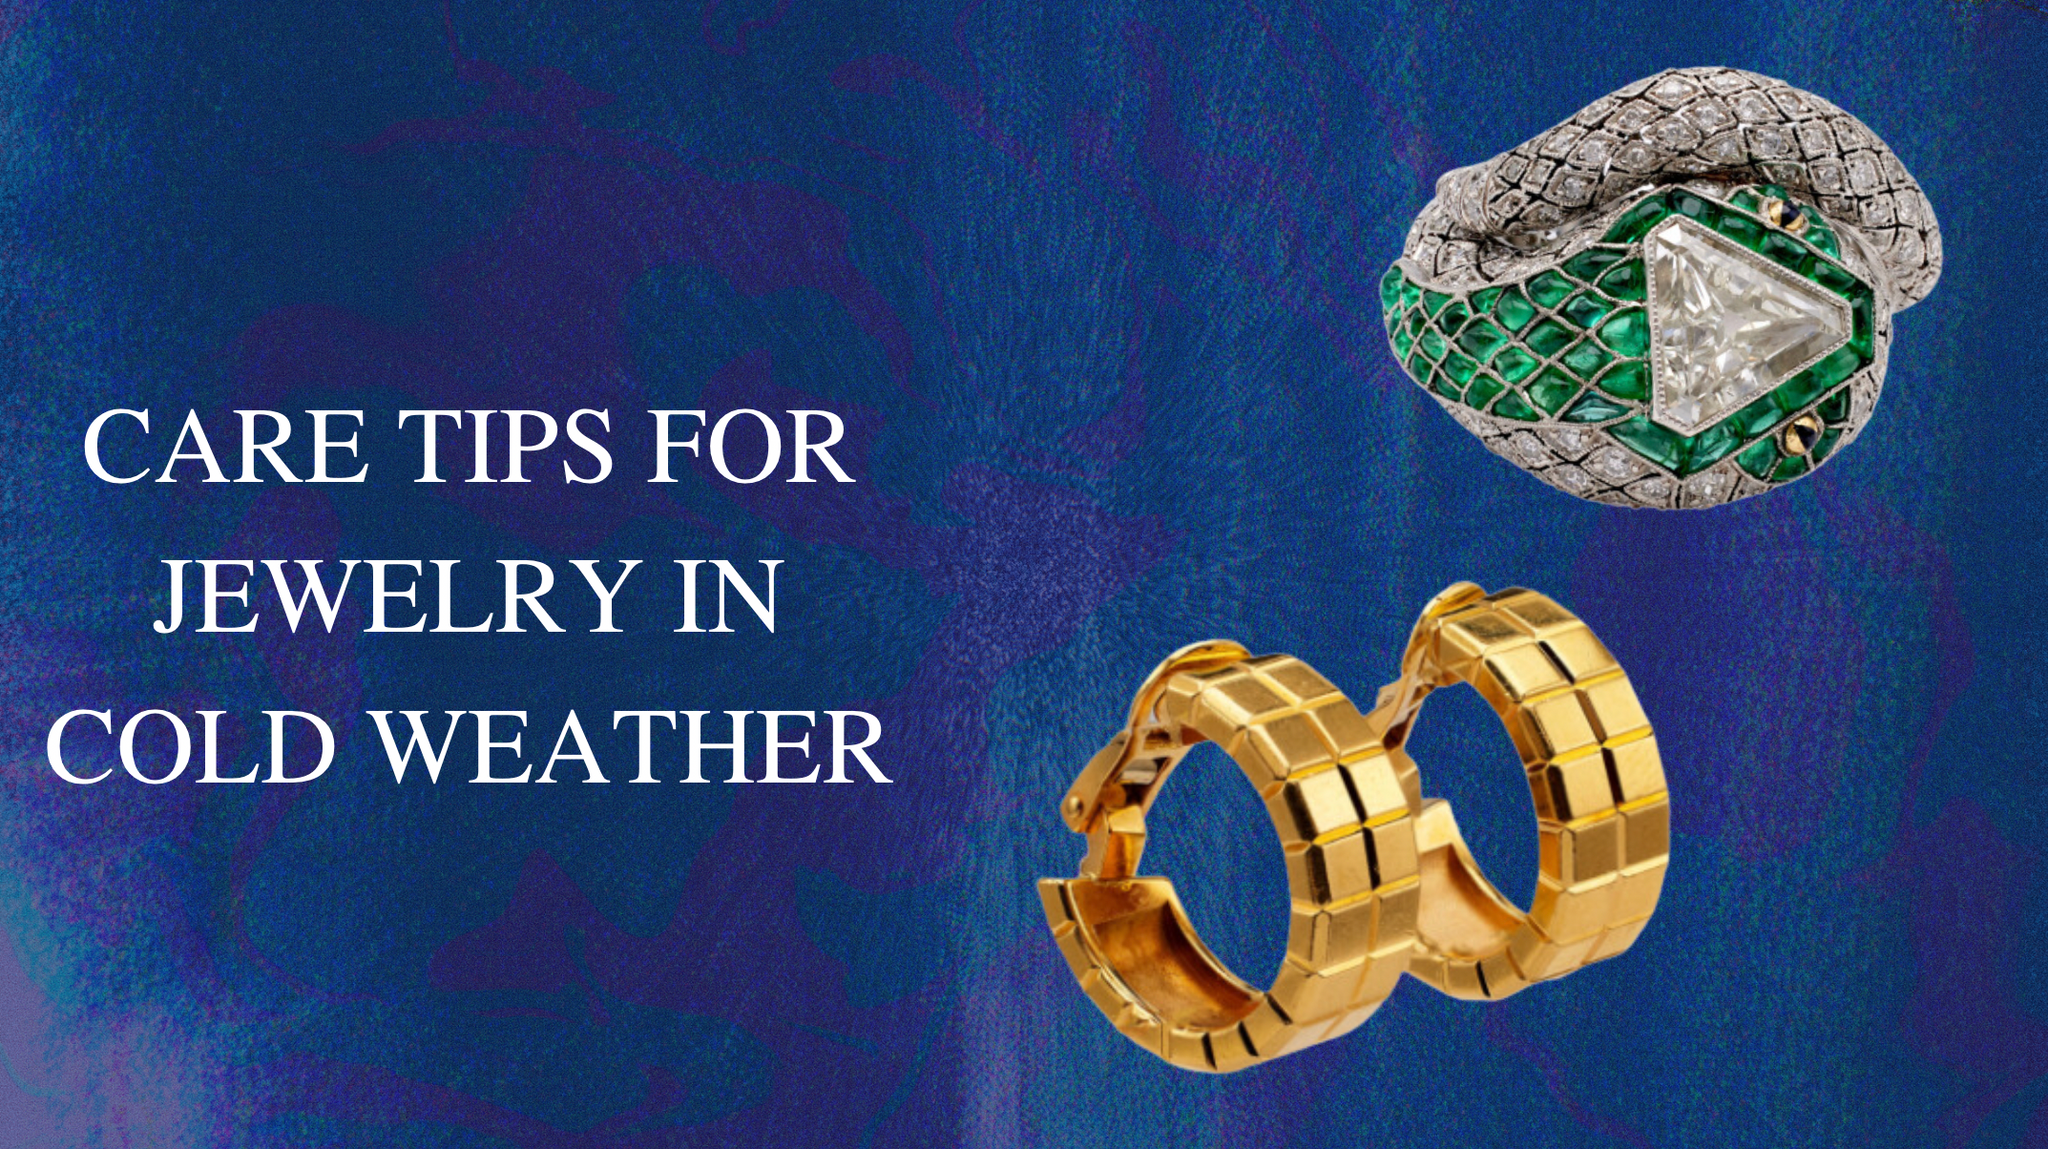 Care Tips For Jewelry in Cold Weather - Jack Weir & Sons- Jack Weir & Sons